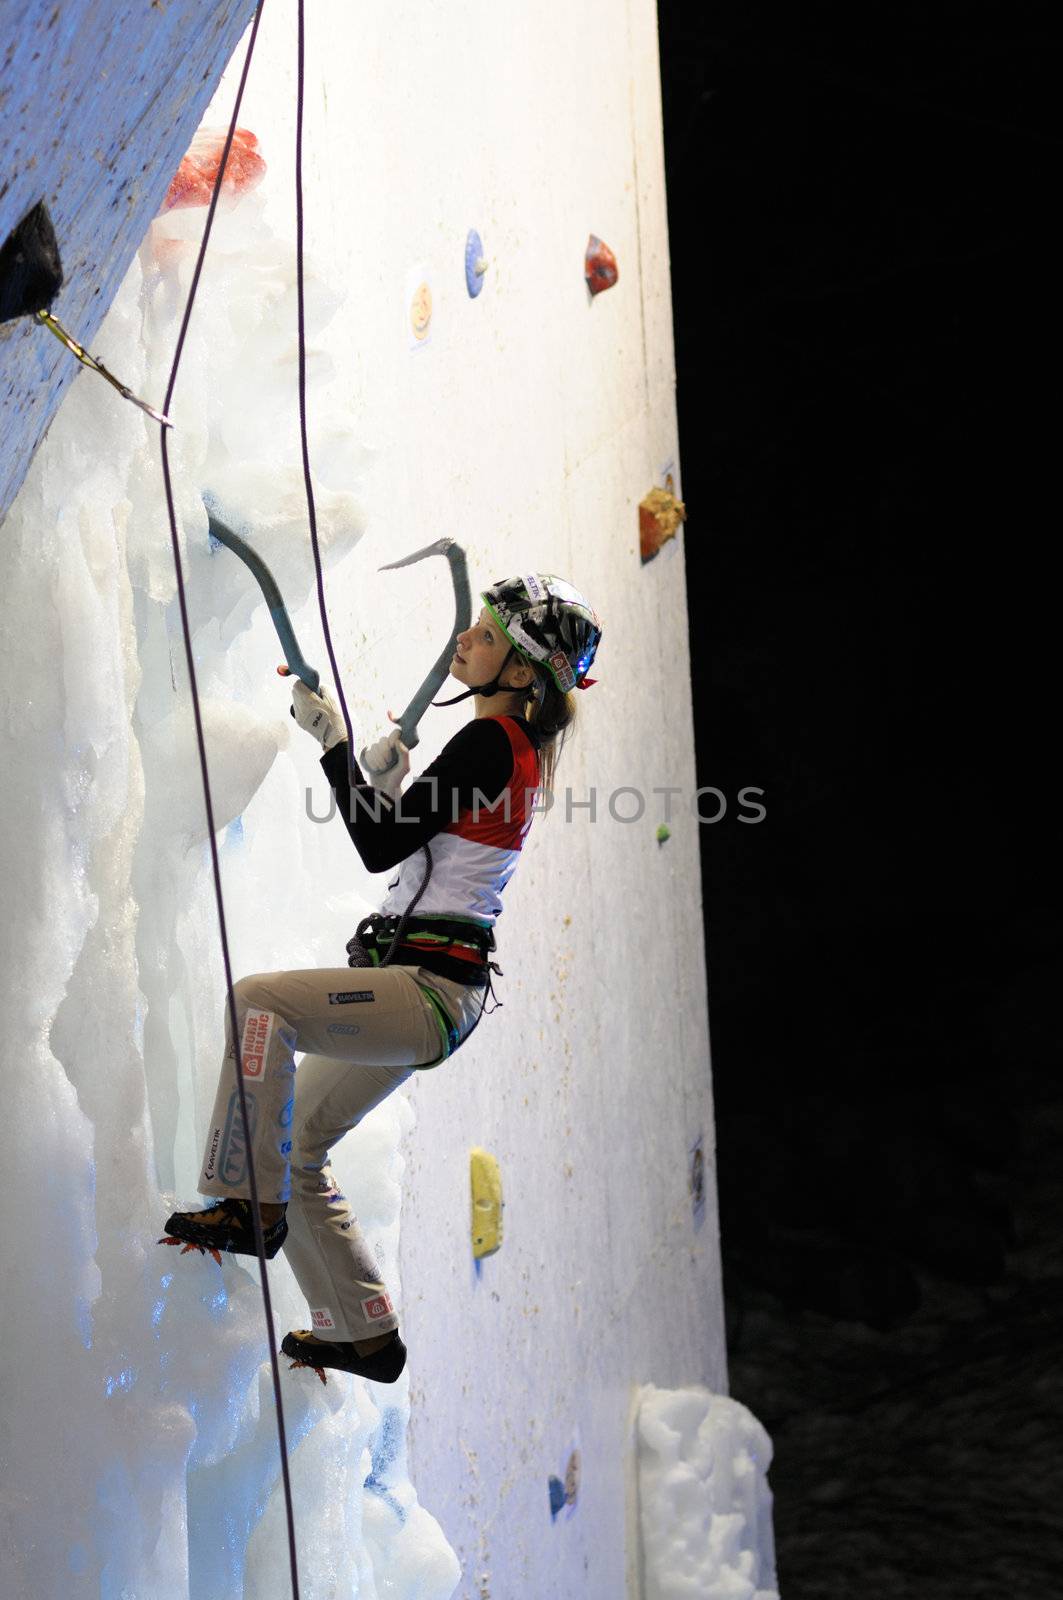 UNKEN, AUSTRIA - FEB 19: Ice climbing european cup finals. Lucie Hrozoca on her final run to win the competition on February 19, 2011 in Heutal, Unken in Austria.